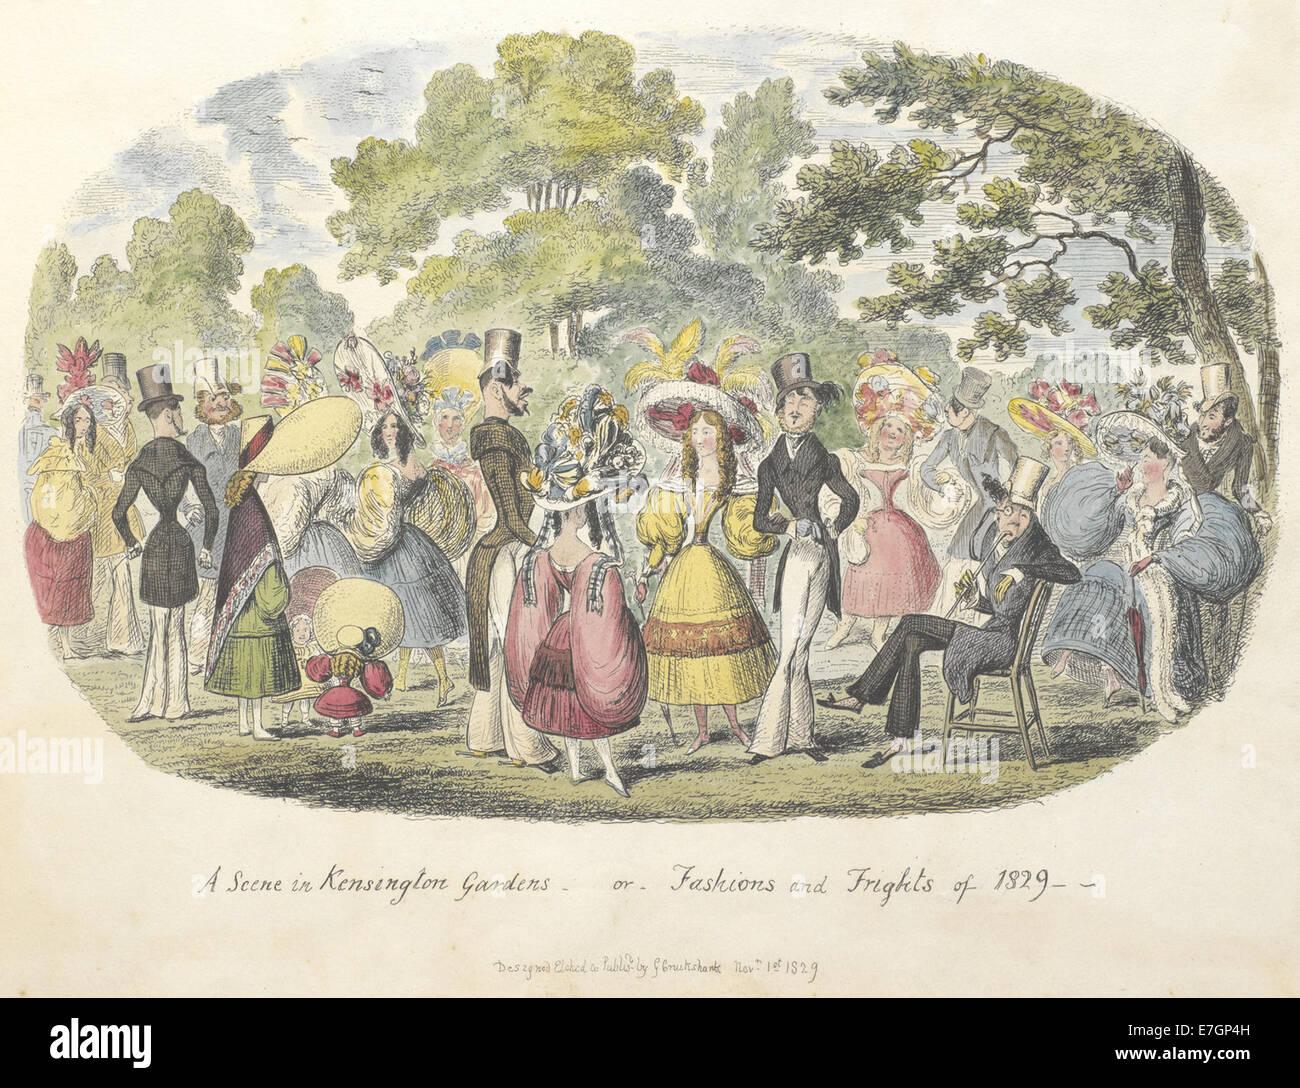 A scene in Kensington Gardens, or fashion and frights of 1829 - Cruikshank, Scraps and sketches (1829), f.8 - BL Stock Photo